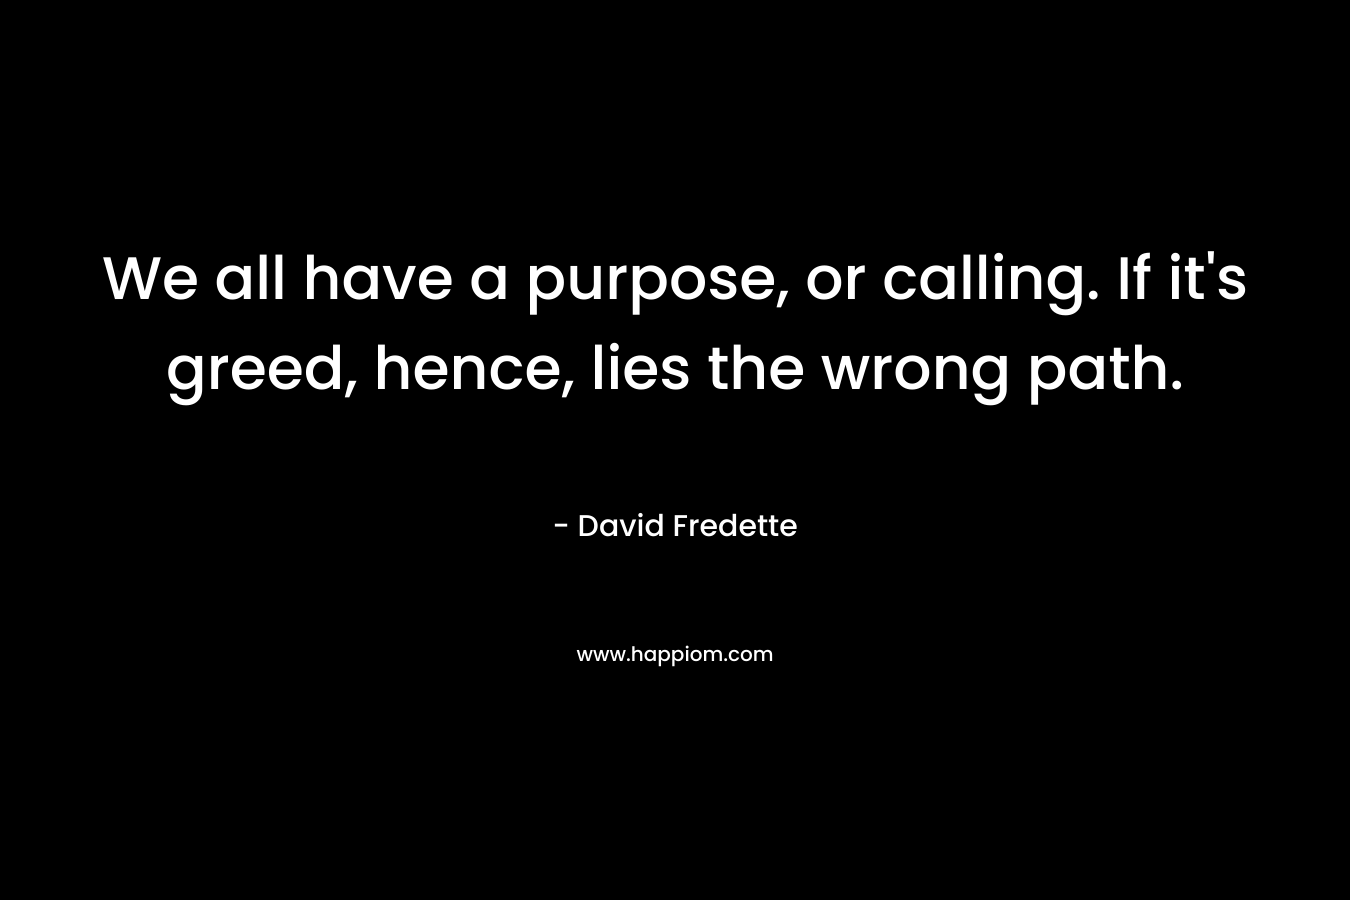 We all have a purpose, or calling. If it's greed, hence, lies the wrong path.